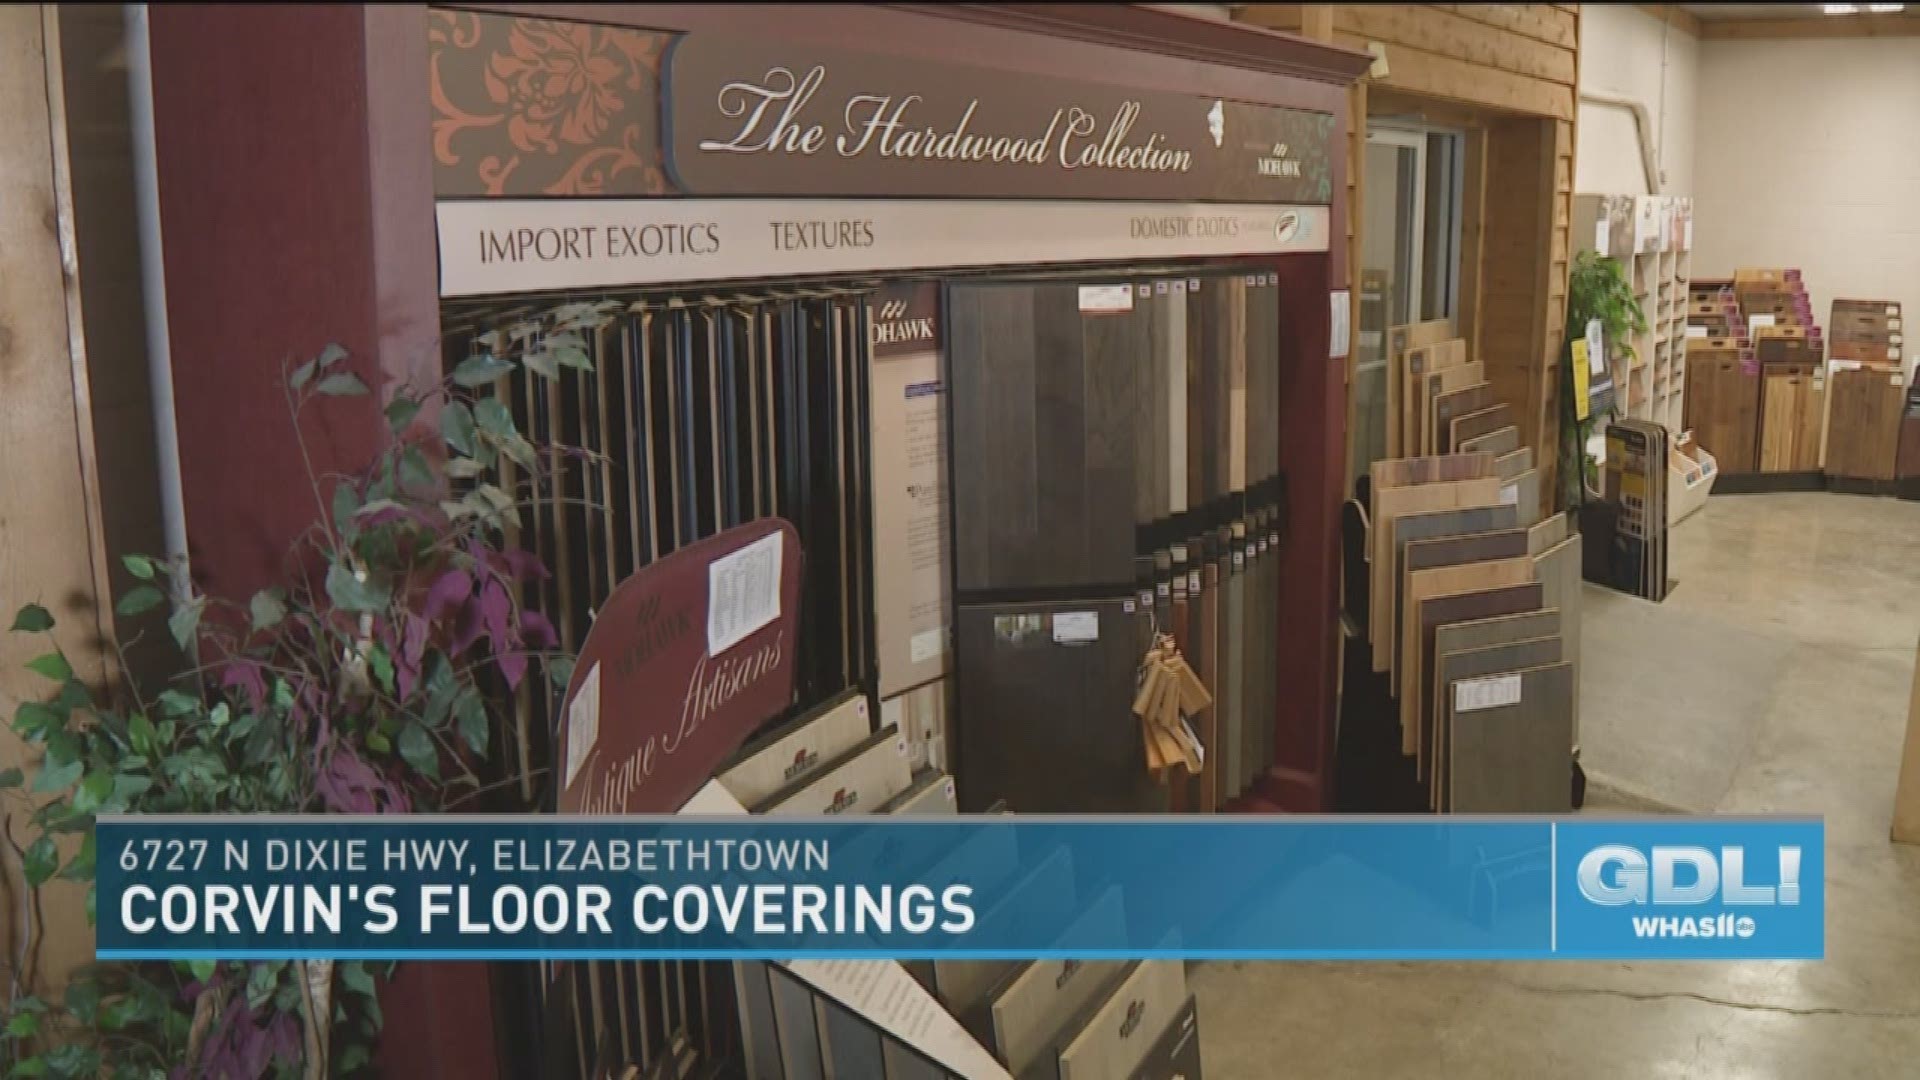 Corvin’s Flooring is located at 6727 North Dixie Highway in Elizabethtown, KY. For more information, call 270-737-5798 or go to CorvinsFloorCoverings.com.